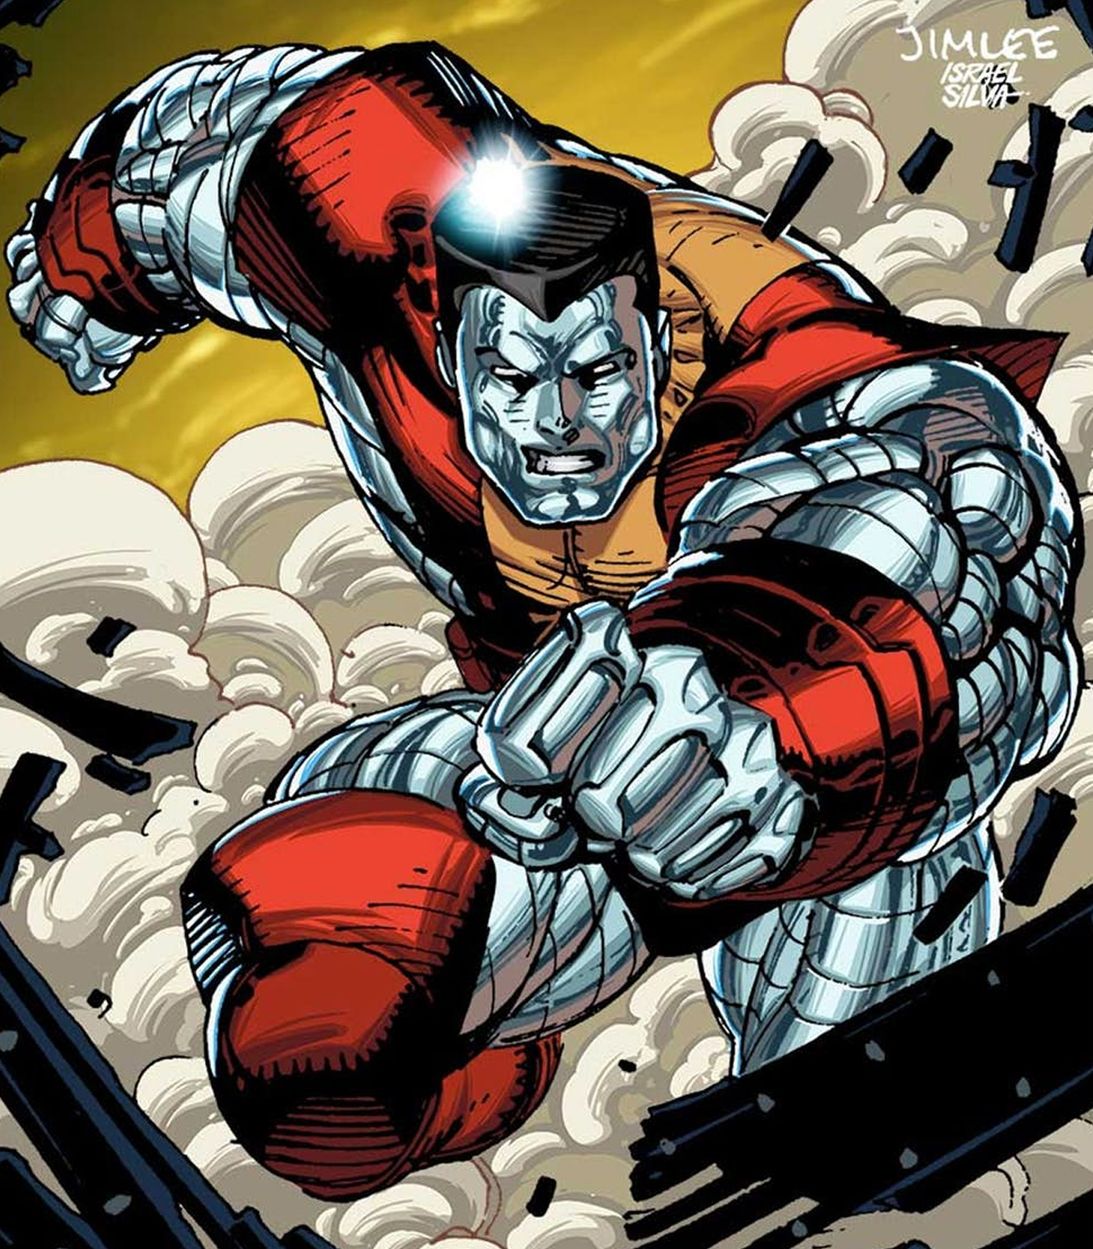 Colossus in X-Men by Jim Lee